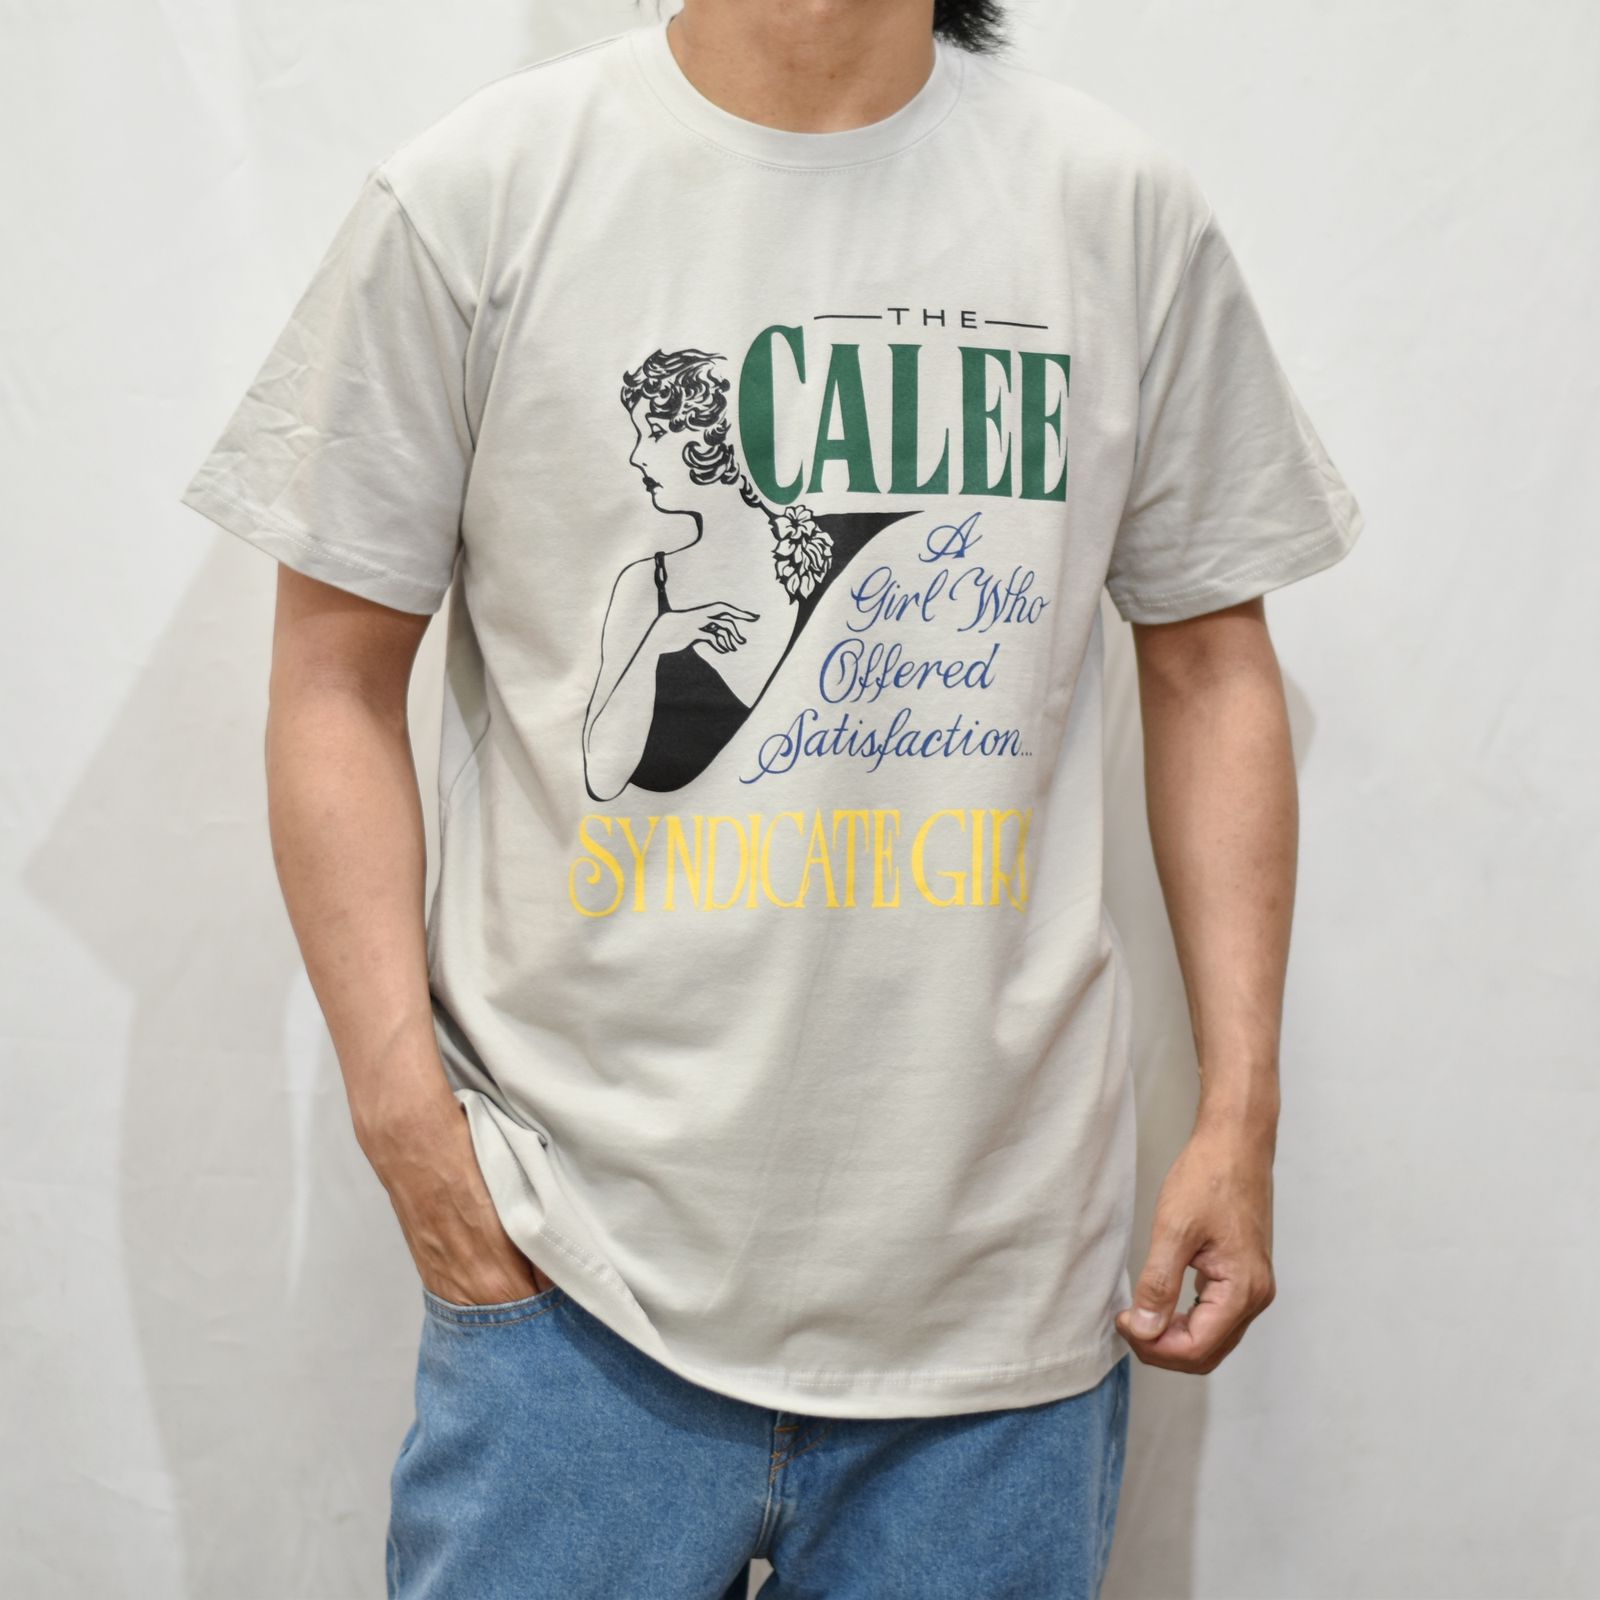 CALEE - キャリー ・ Tシャツ コレクション ♪ | chord online store